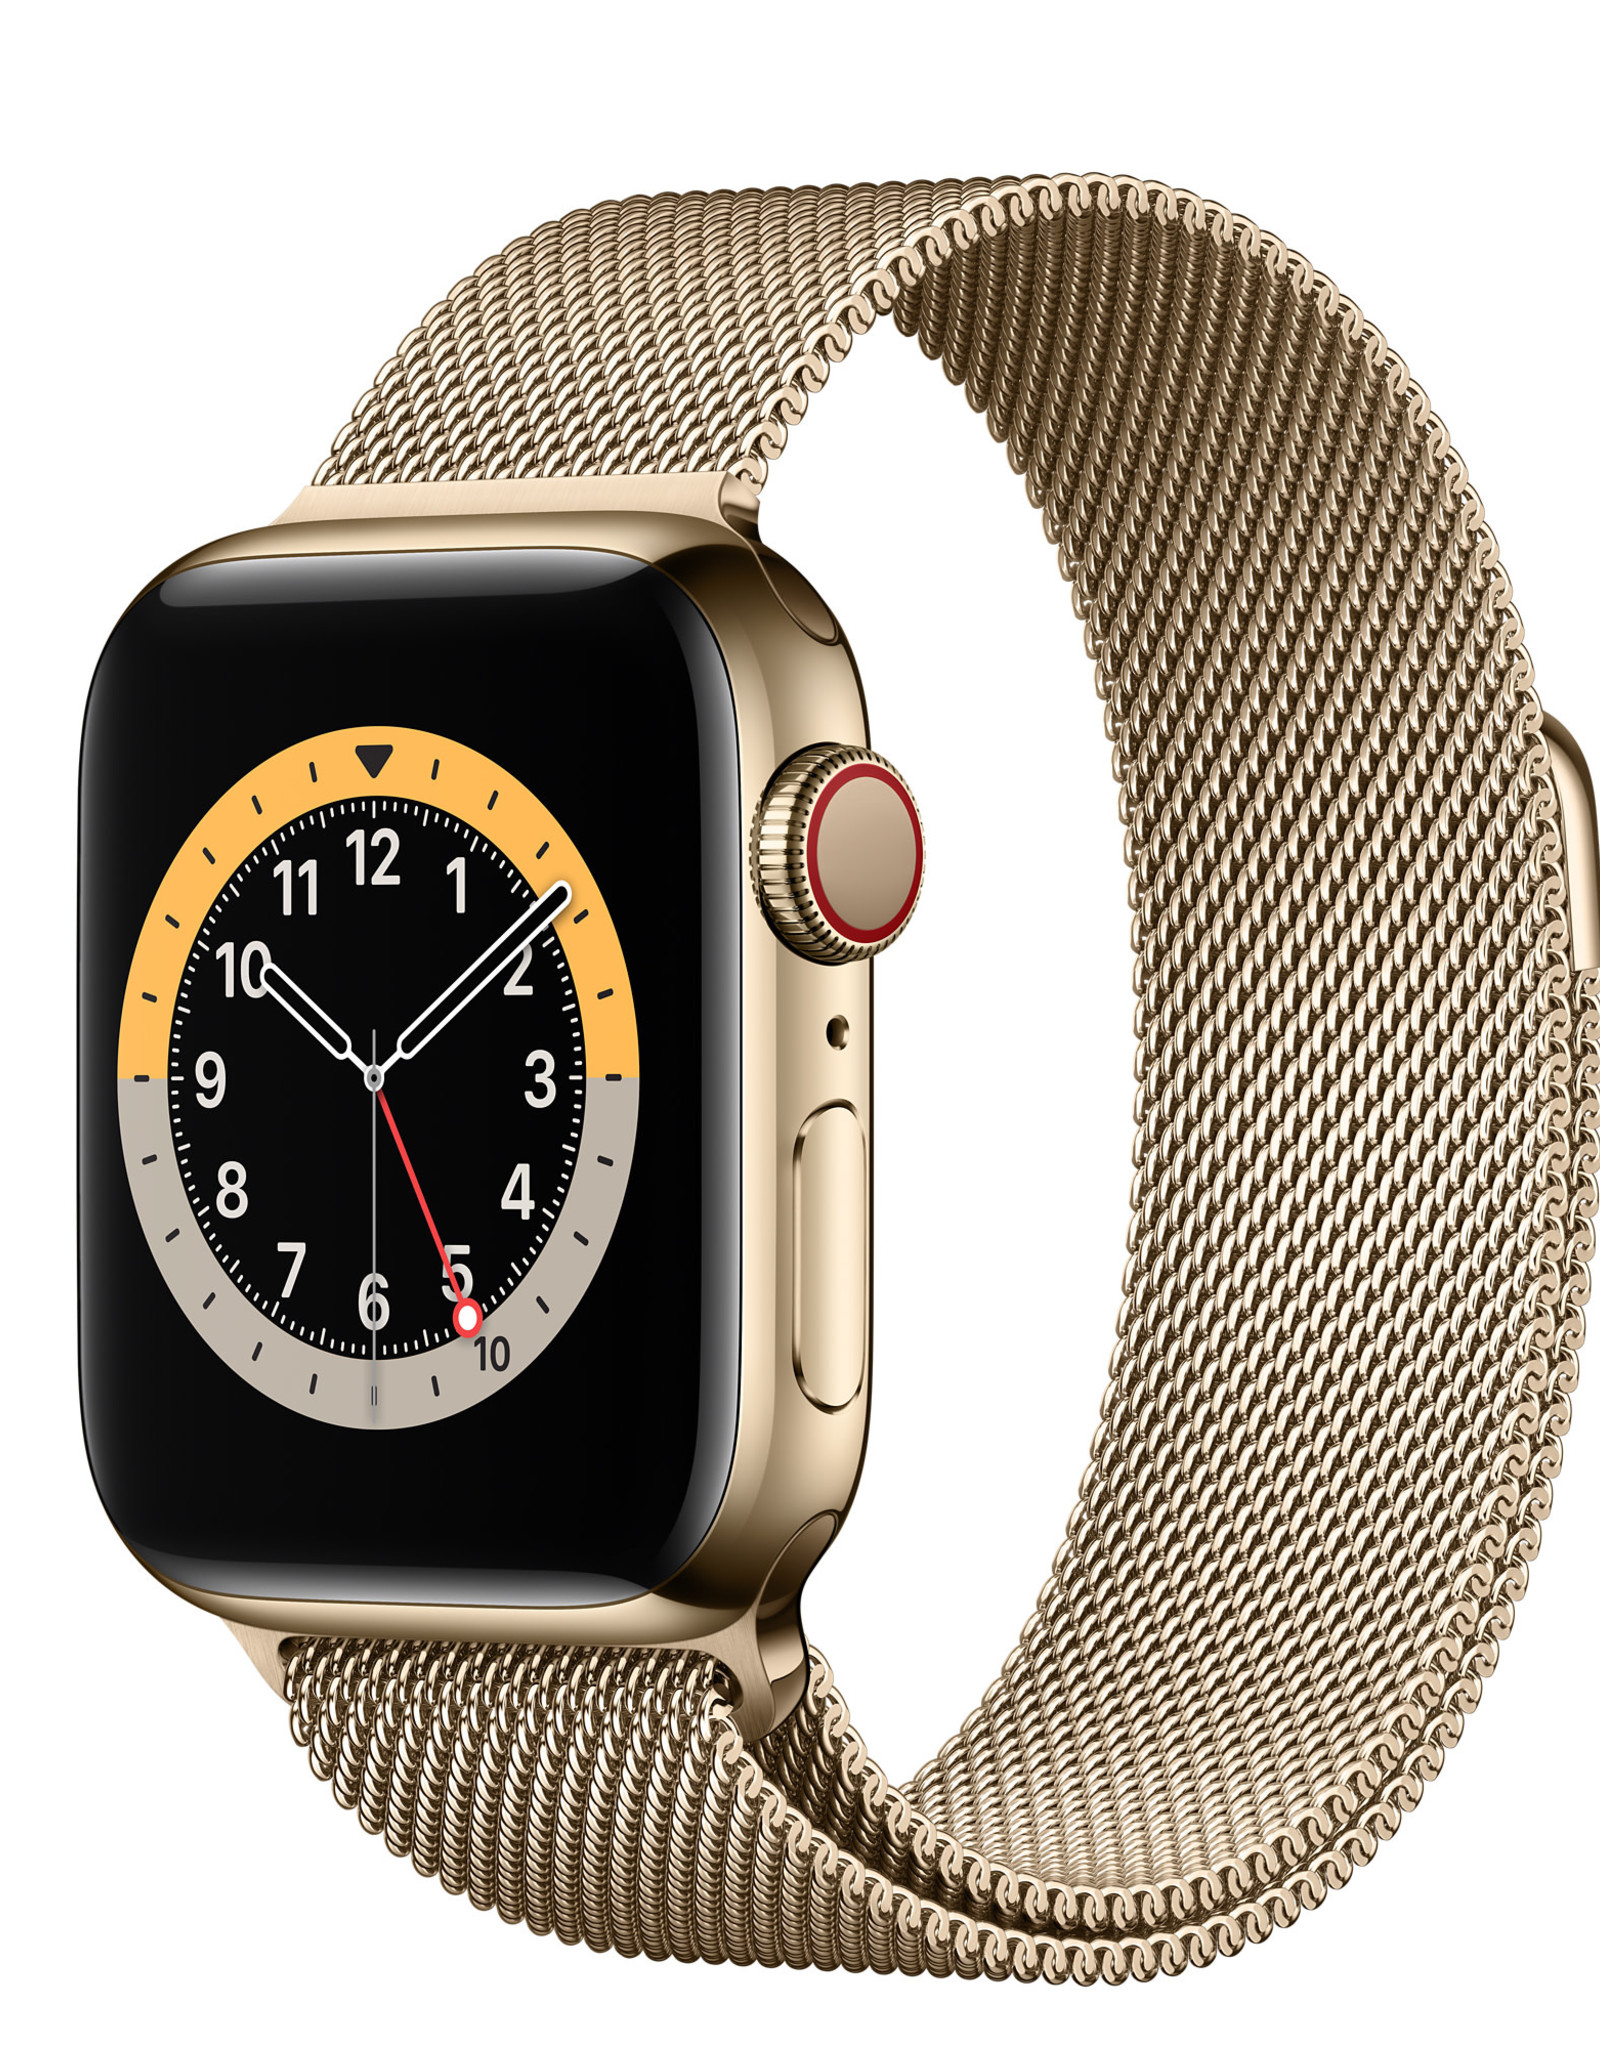 Apple Watch Apple Watch Stainless Steel Band 38/40mm